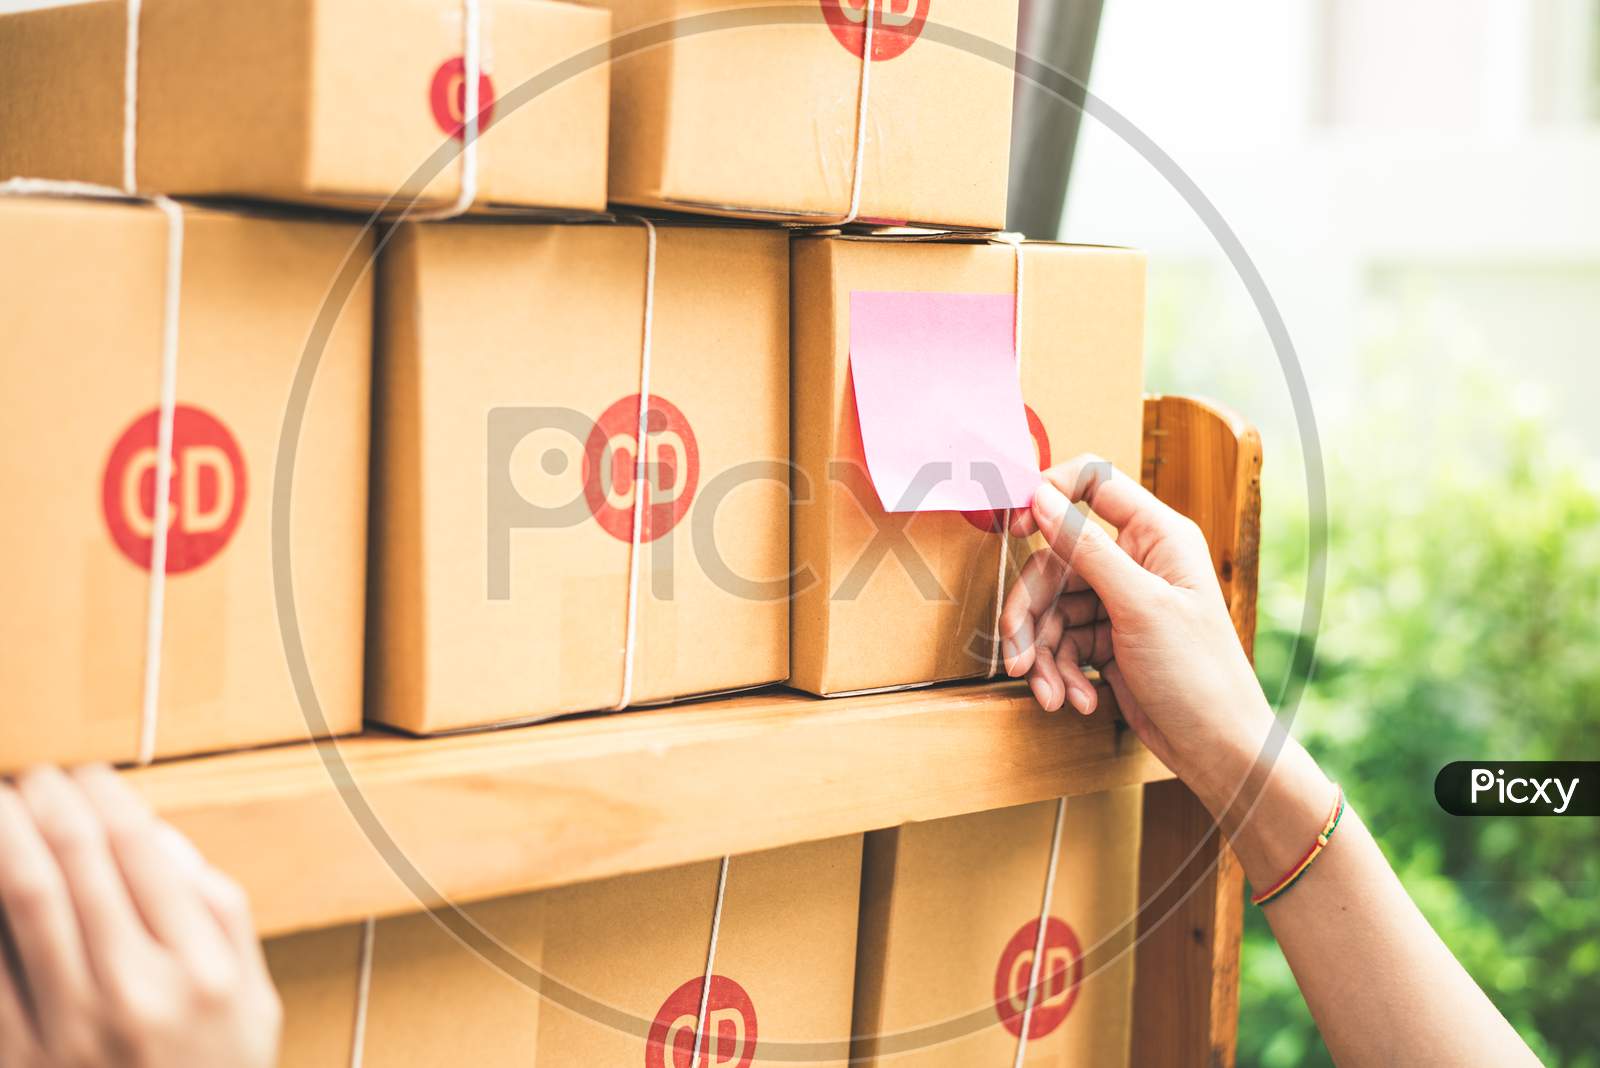 Close Up Of Woman Hand When Sticking Memo Paper To Post Or Parcel Mail Box. Business And Online Shopping Concept. Post Office Delivery And Home Service Order Theme.